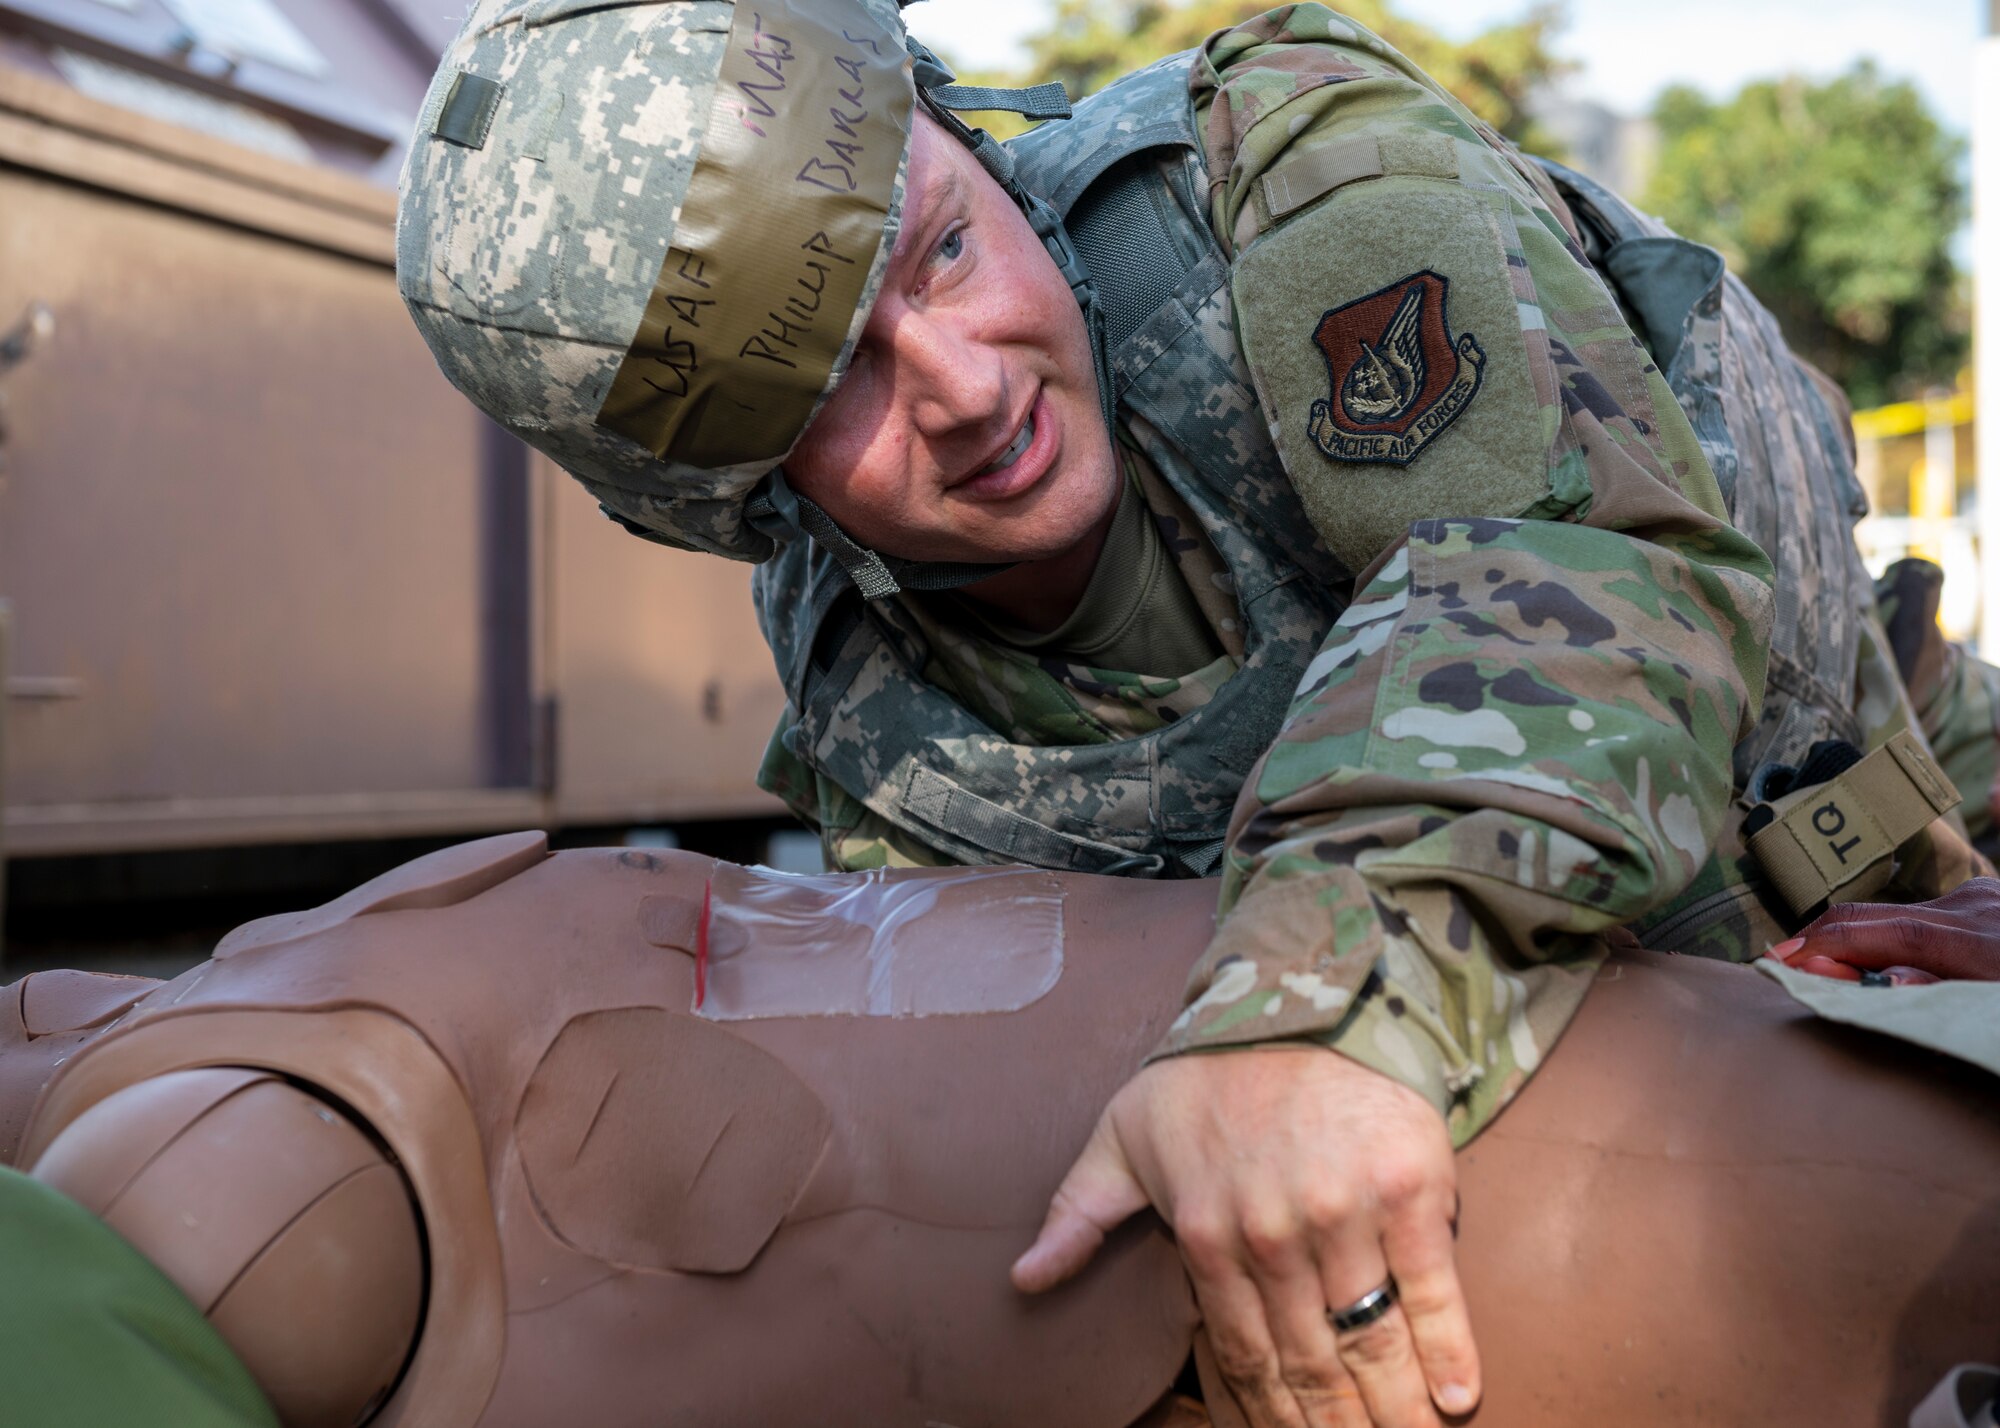 A man in combat gear attempts to roll over a medical training dummy